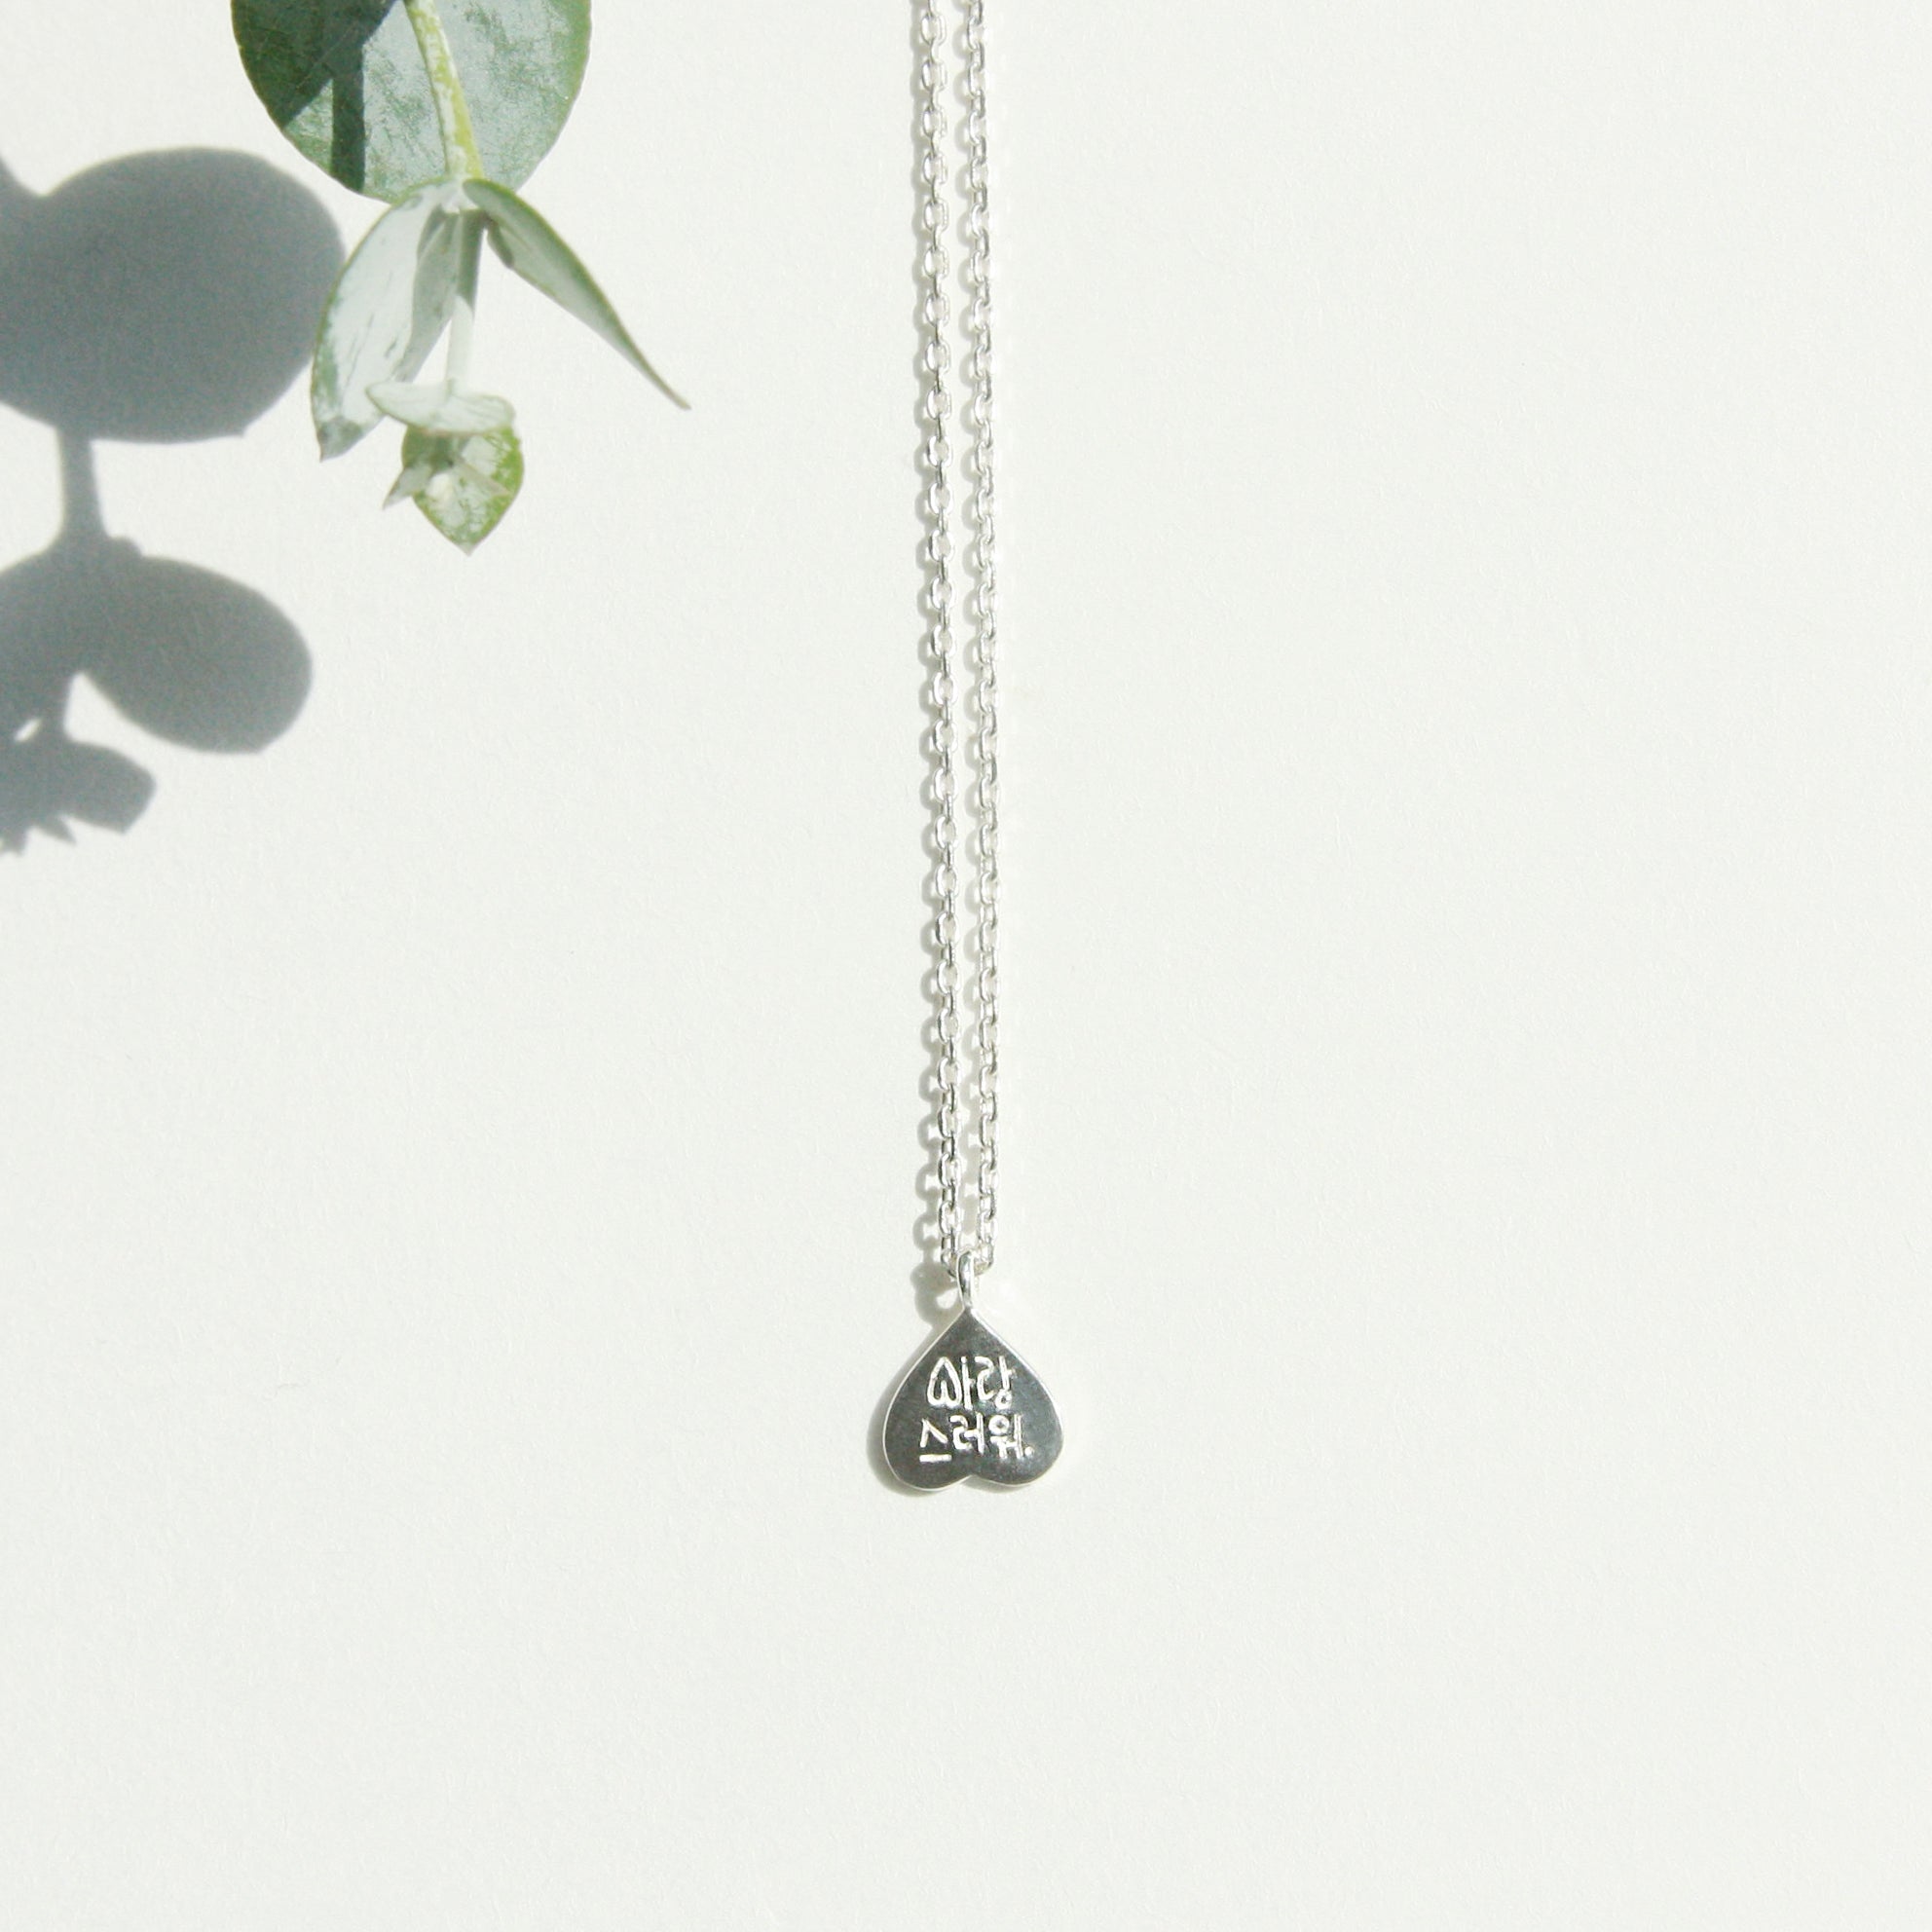 You are lovely Necklace